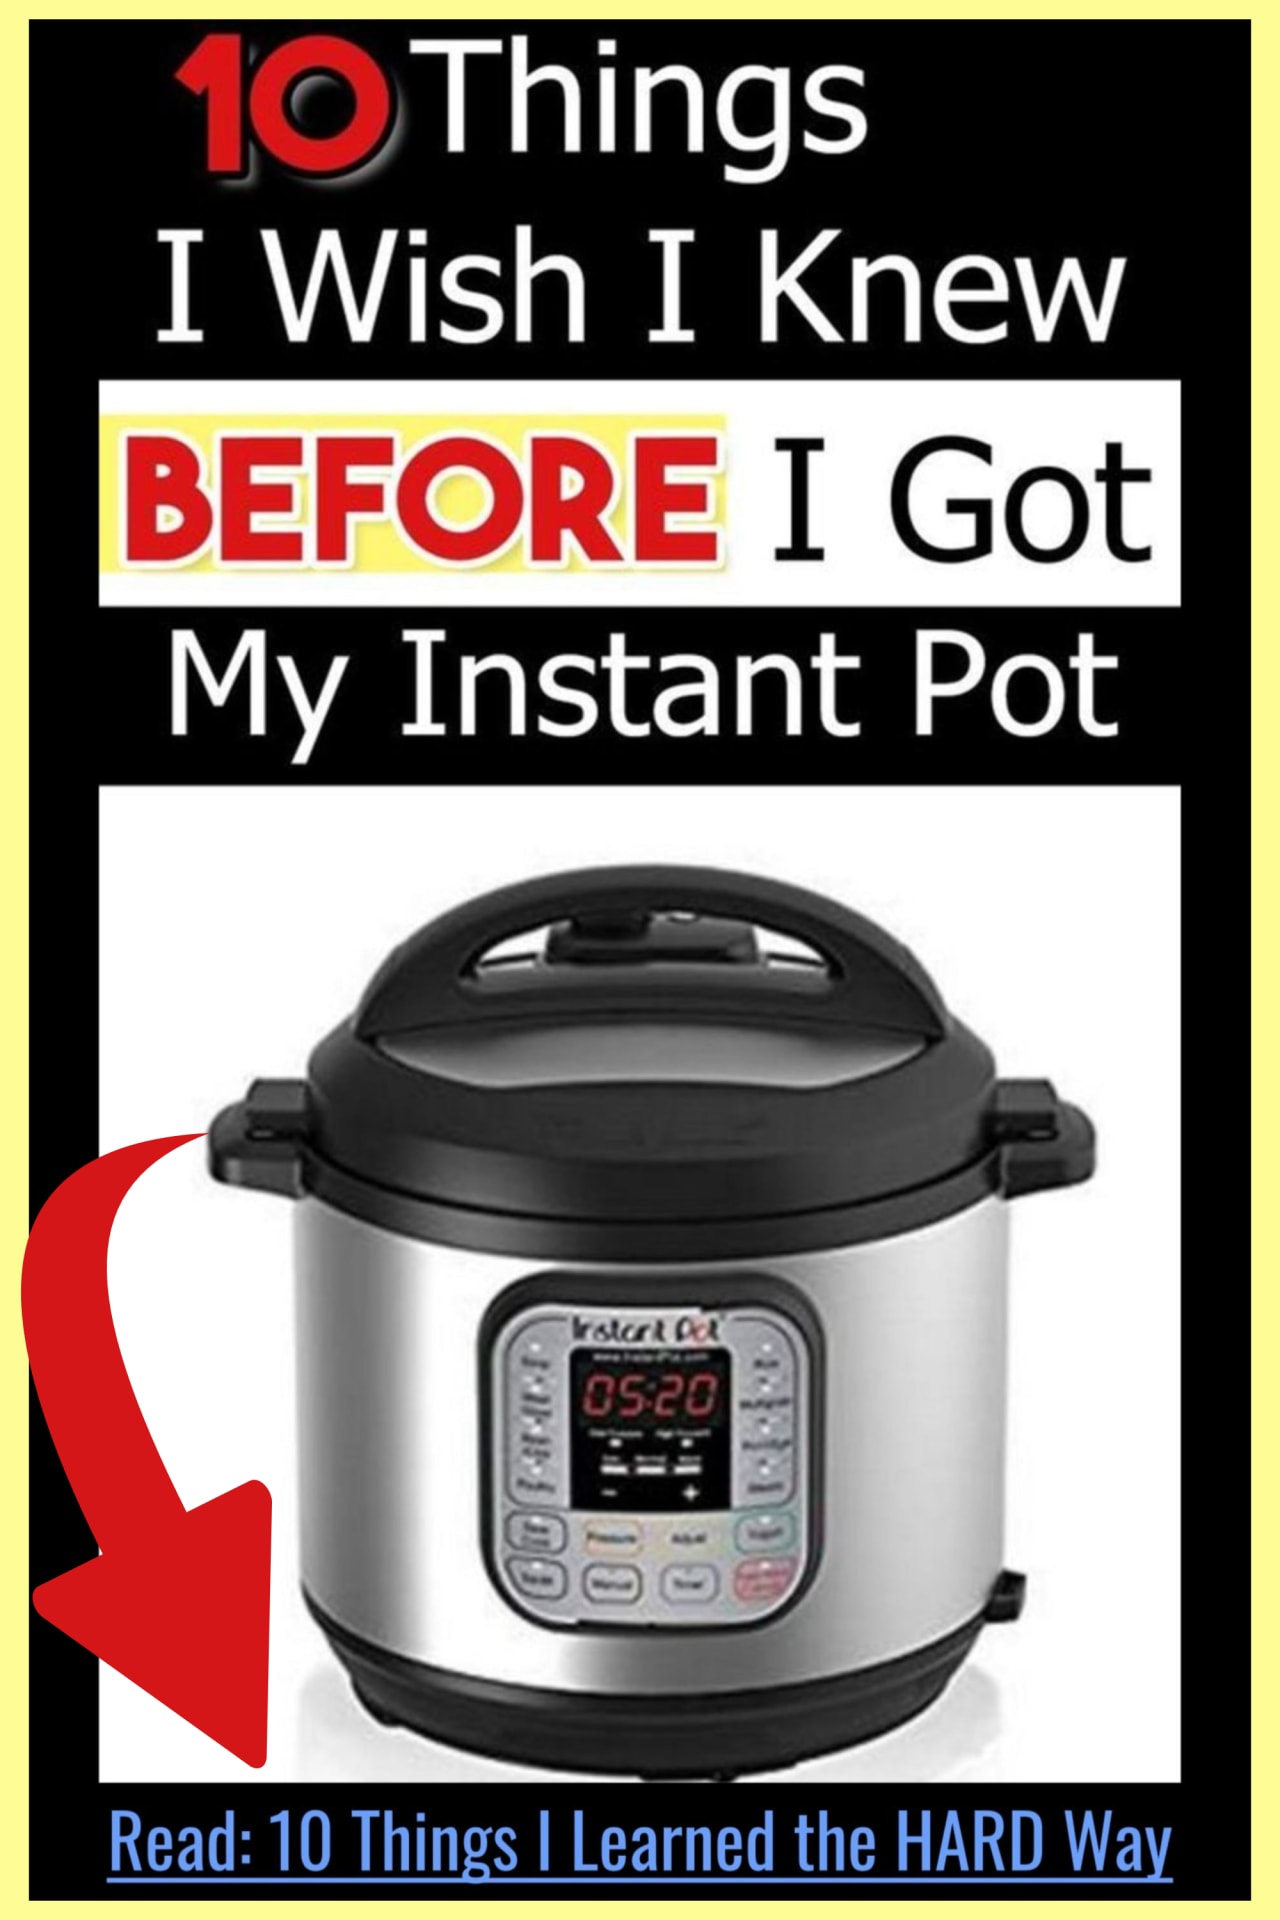 Instant Pot Cooking Times Charts and Instant Pot Tips for Beginners